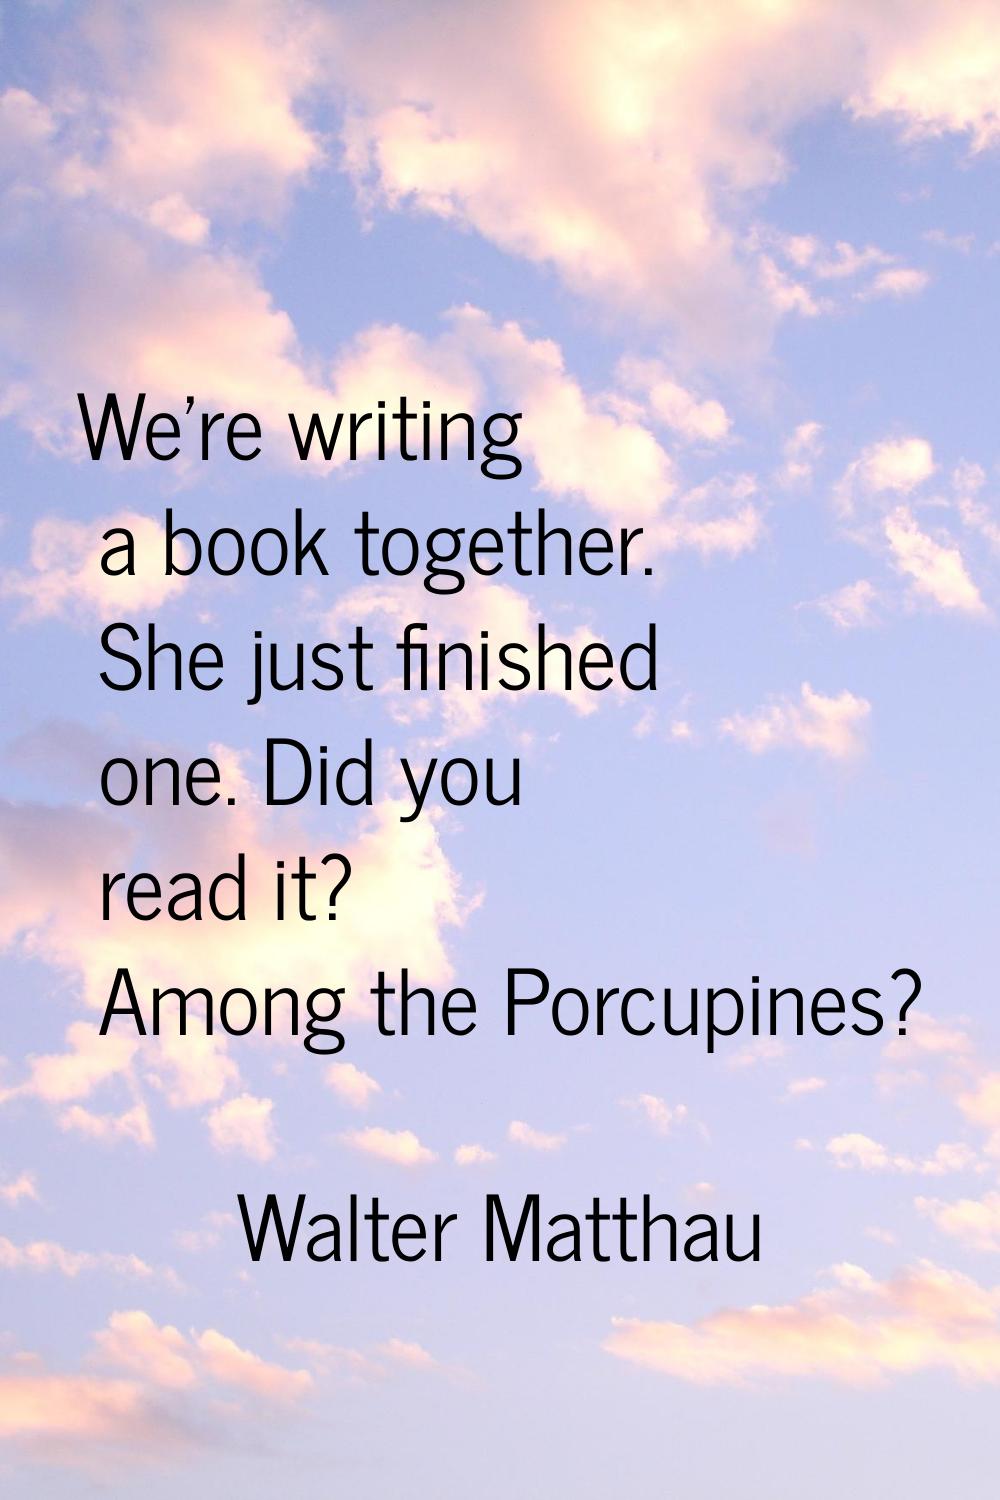 We're writing a book together. She just finished one. Did you read it? Among the Porcupines?